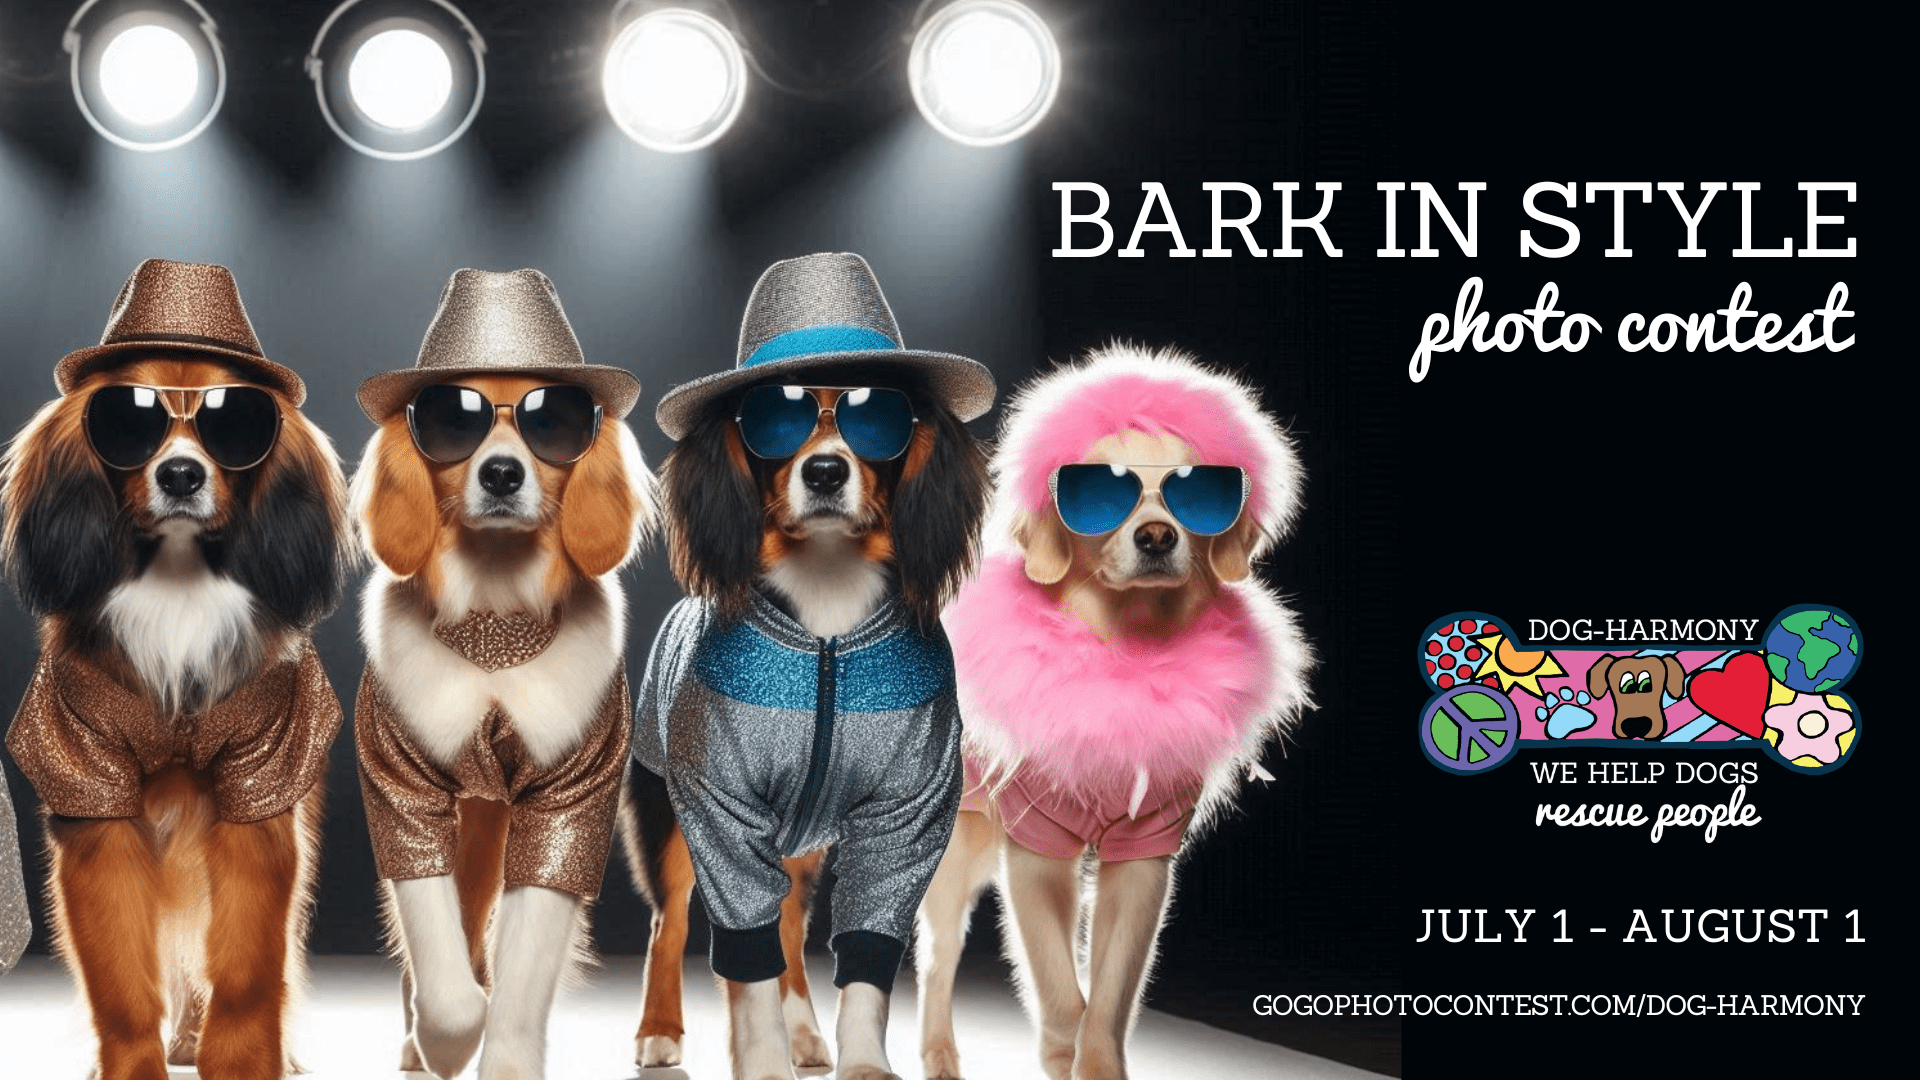 dog-harmony's bark in style photo contest (july 1 to august 1) graphic